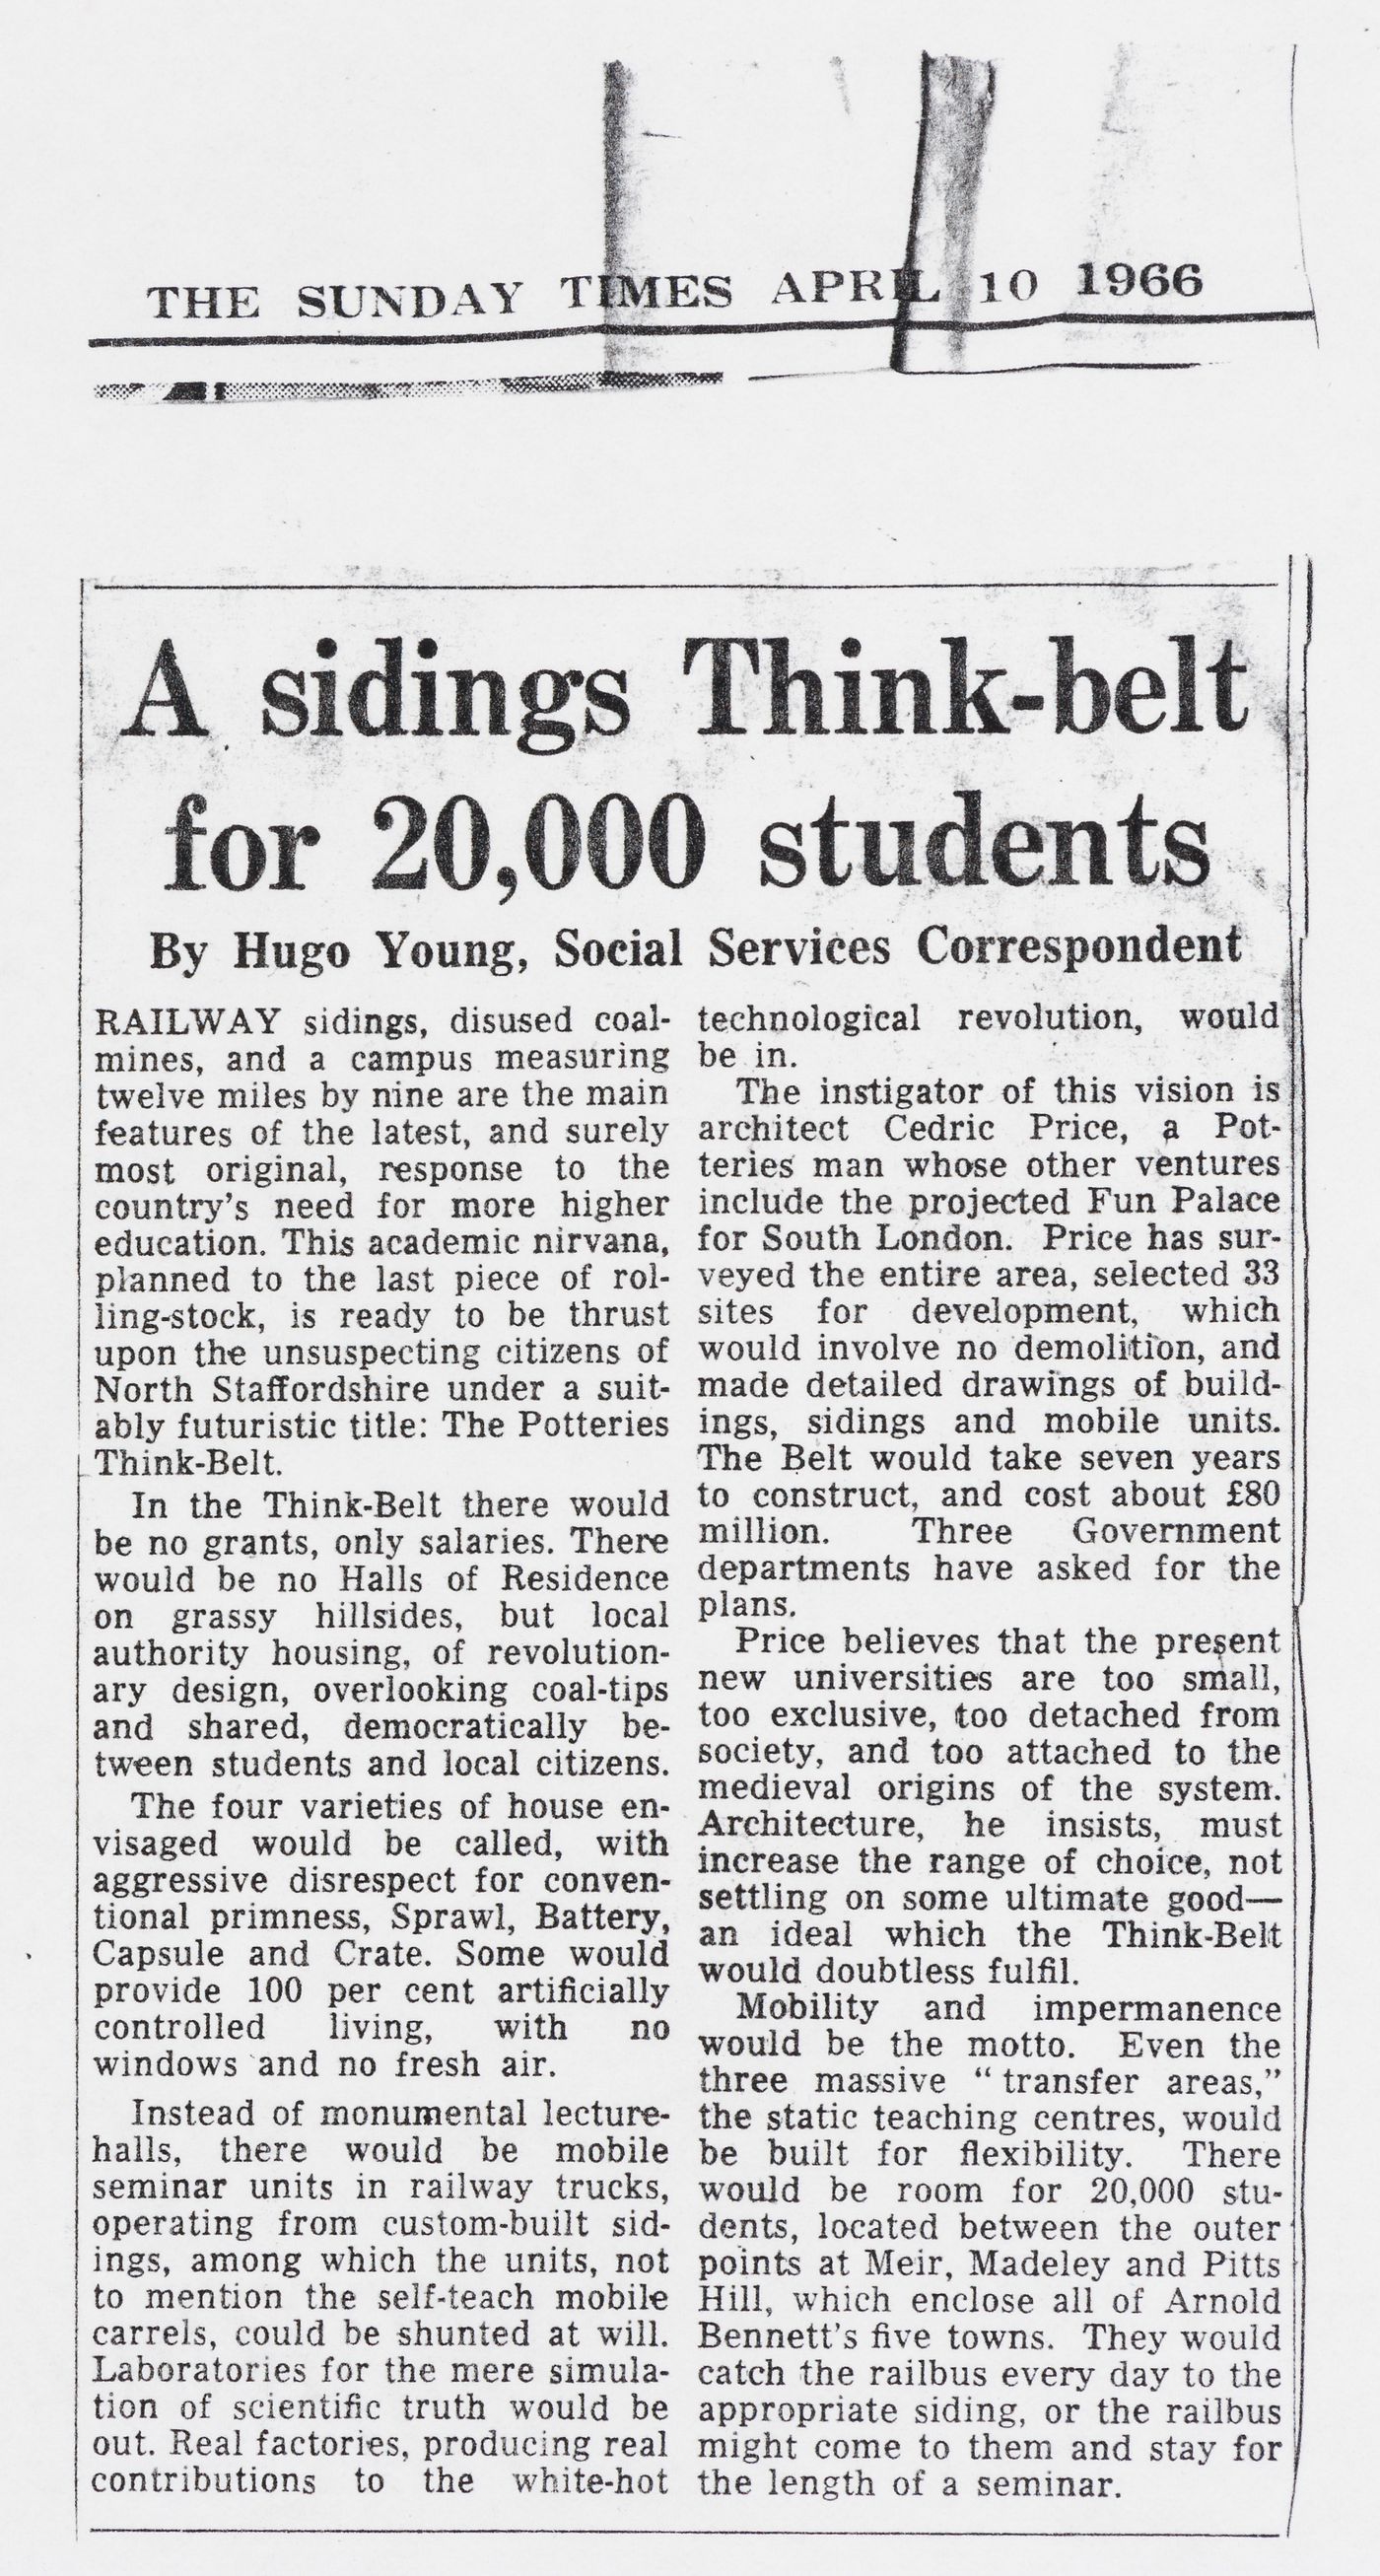 A sidings Think-belt for 20,000 students